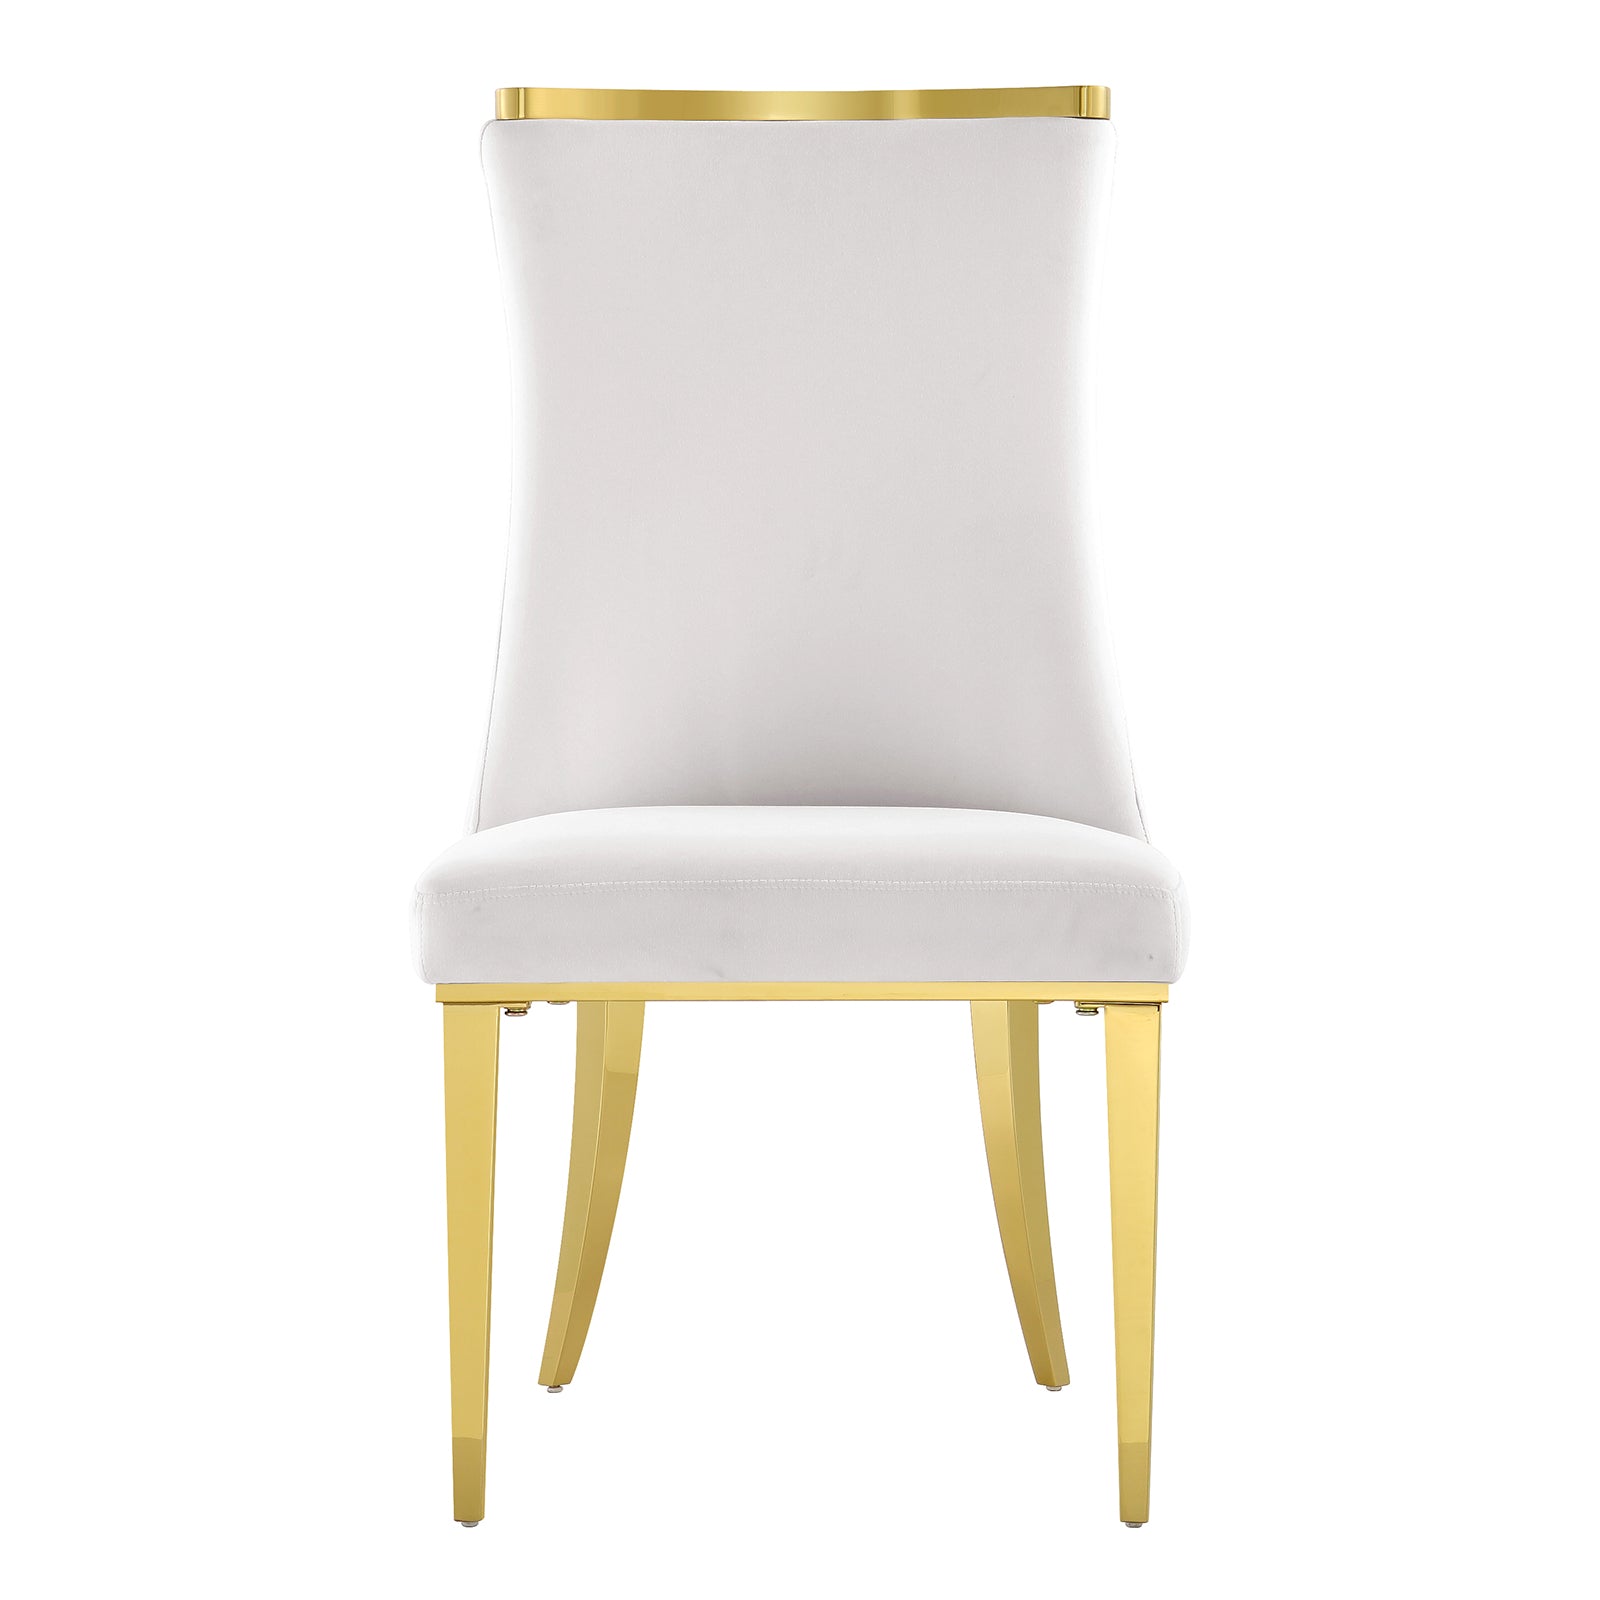 719 Set | AUZ White and Gold Dining room Sets for 6